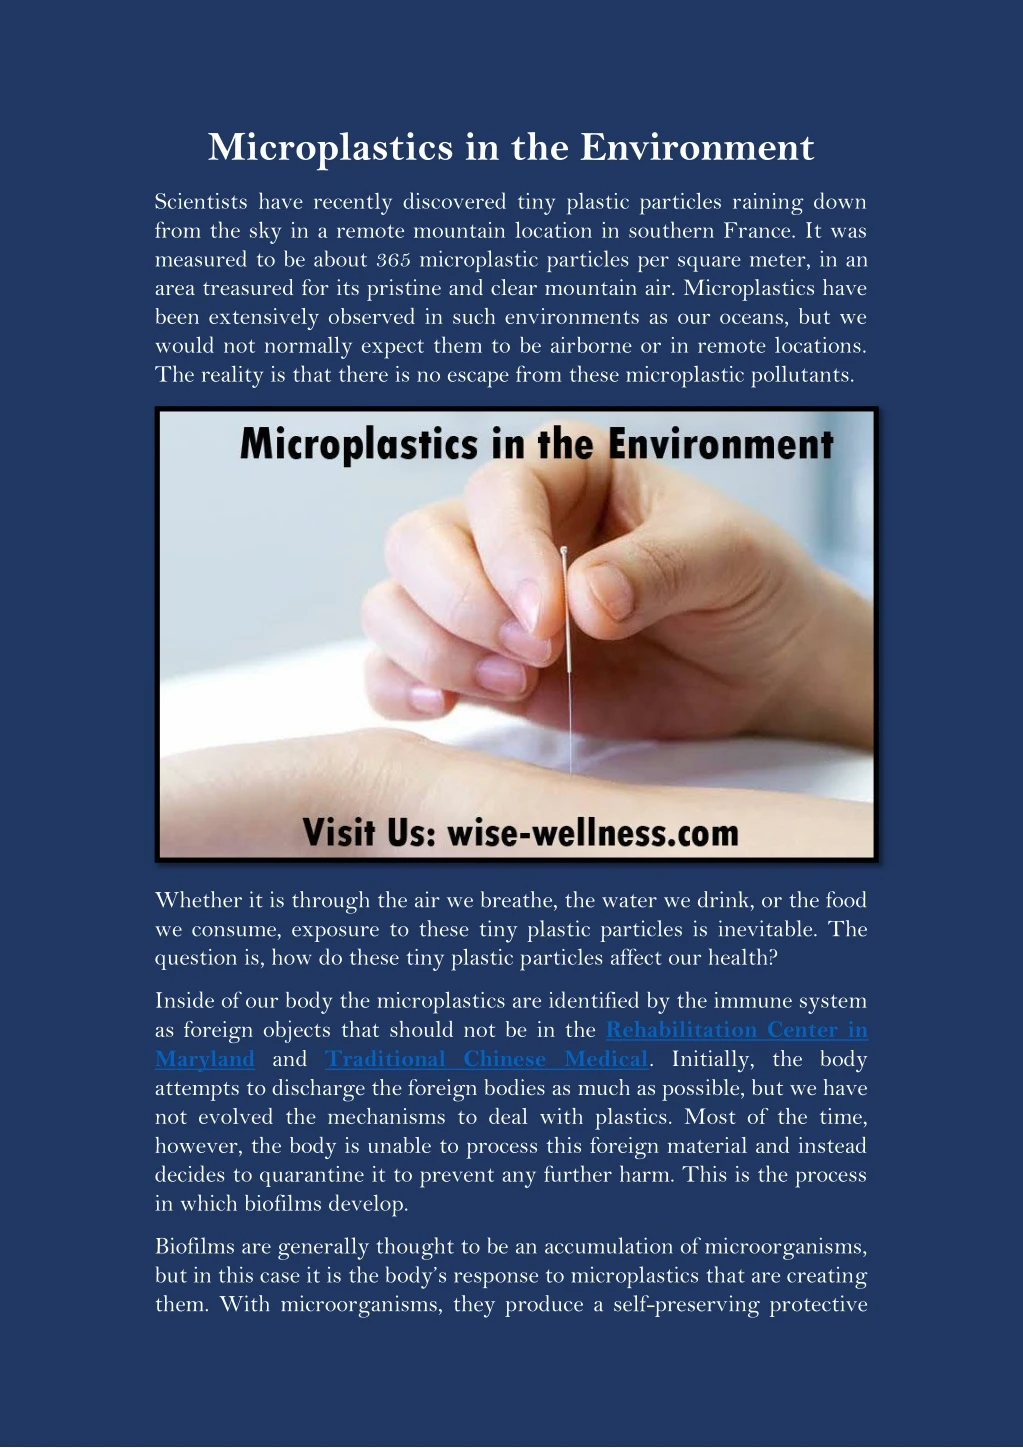 microplastics in the environment